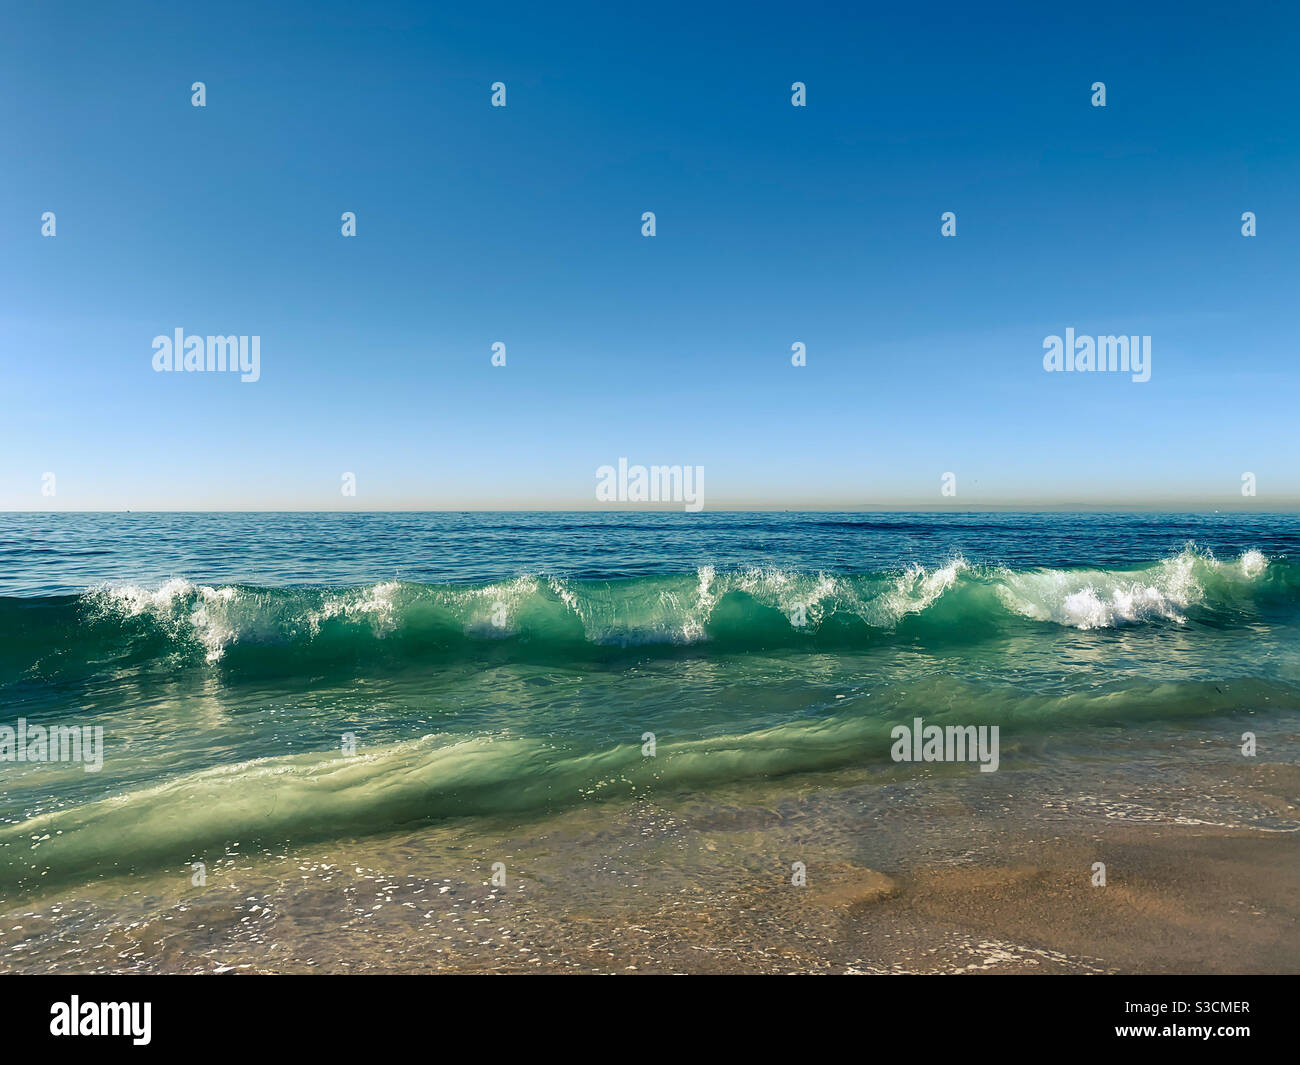 Waves crushing onto sandy beach on a clear sunny day. Stock Photo